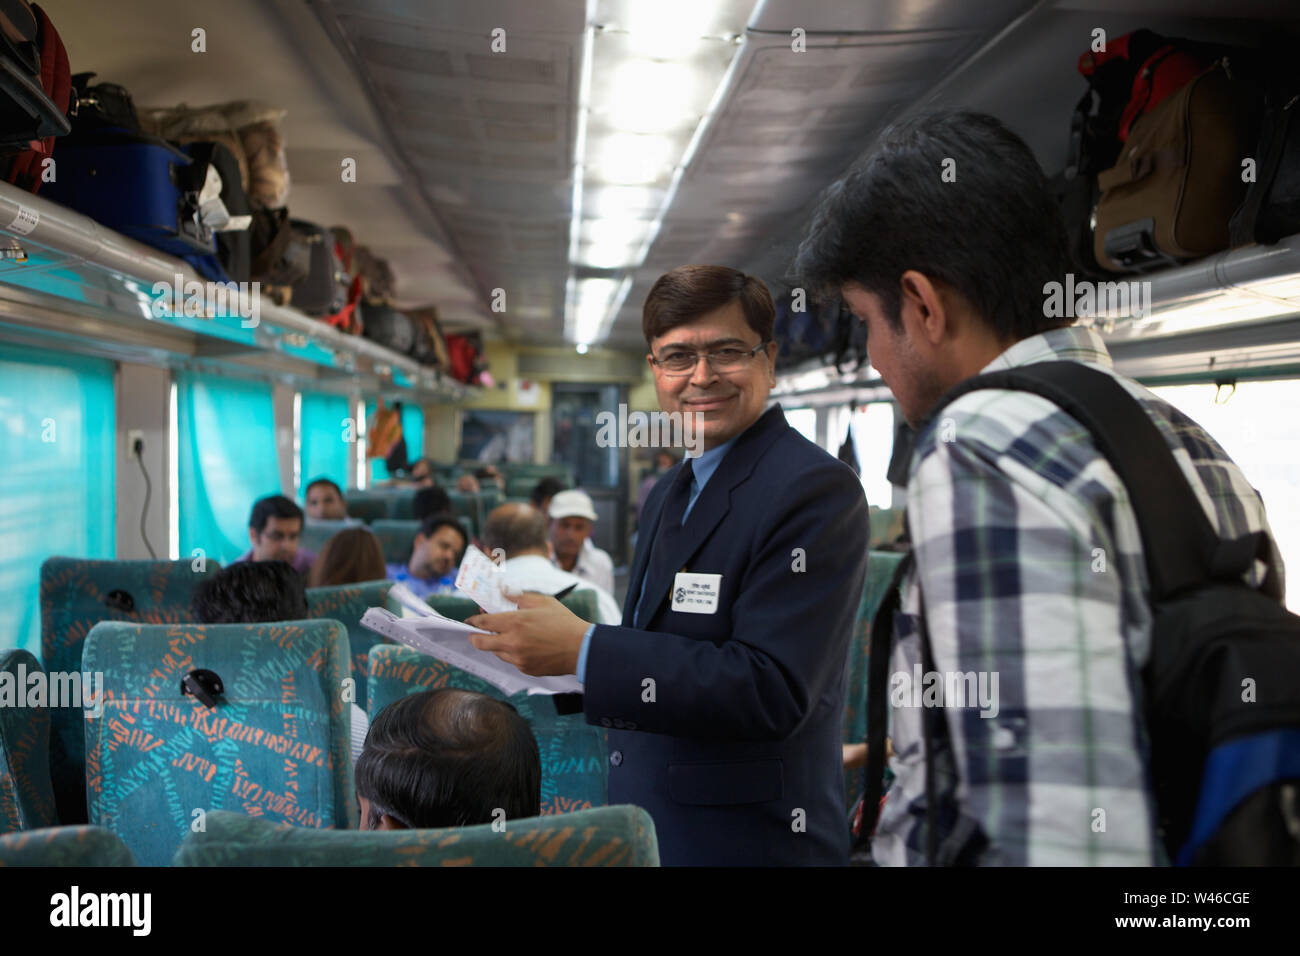 Ticket collector checking tickets in a train Stock Photo